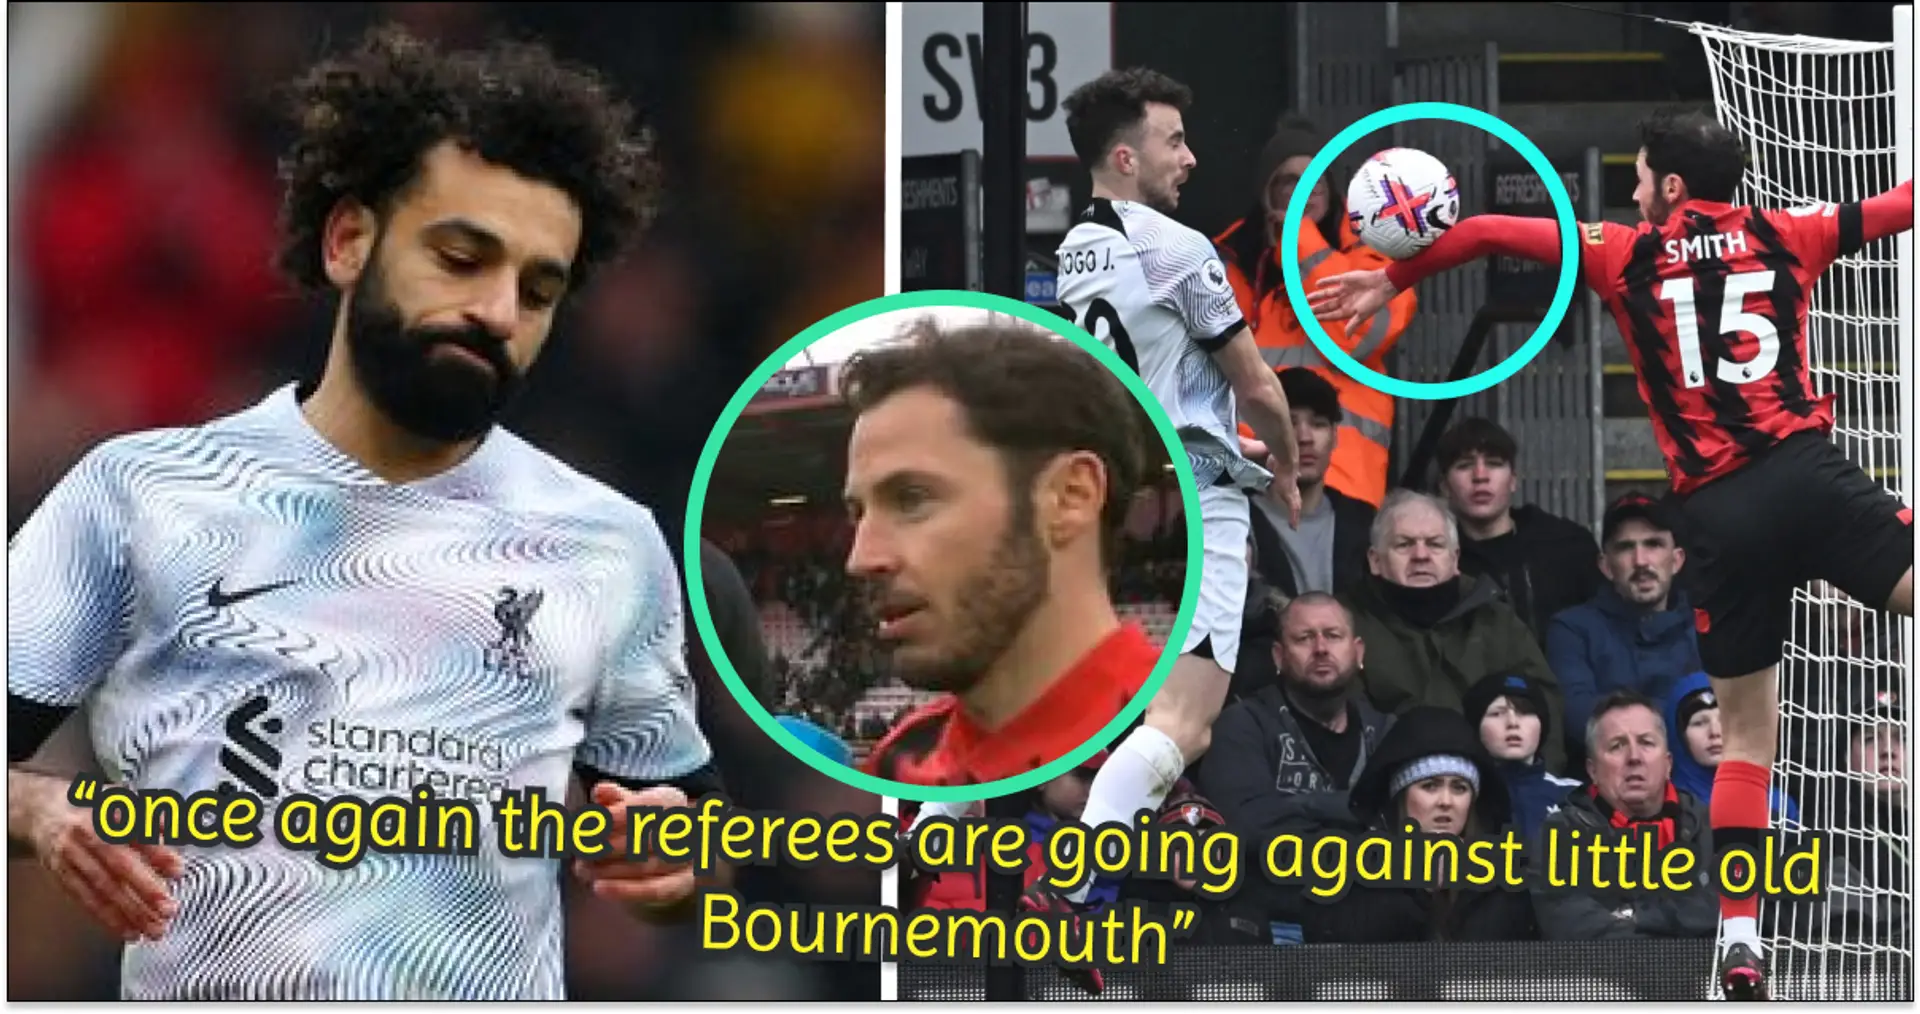 'Liverpool didn't deserve to score': B'mouth player brands Salah penalty miss 'justice'